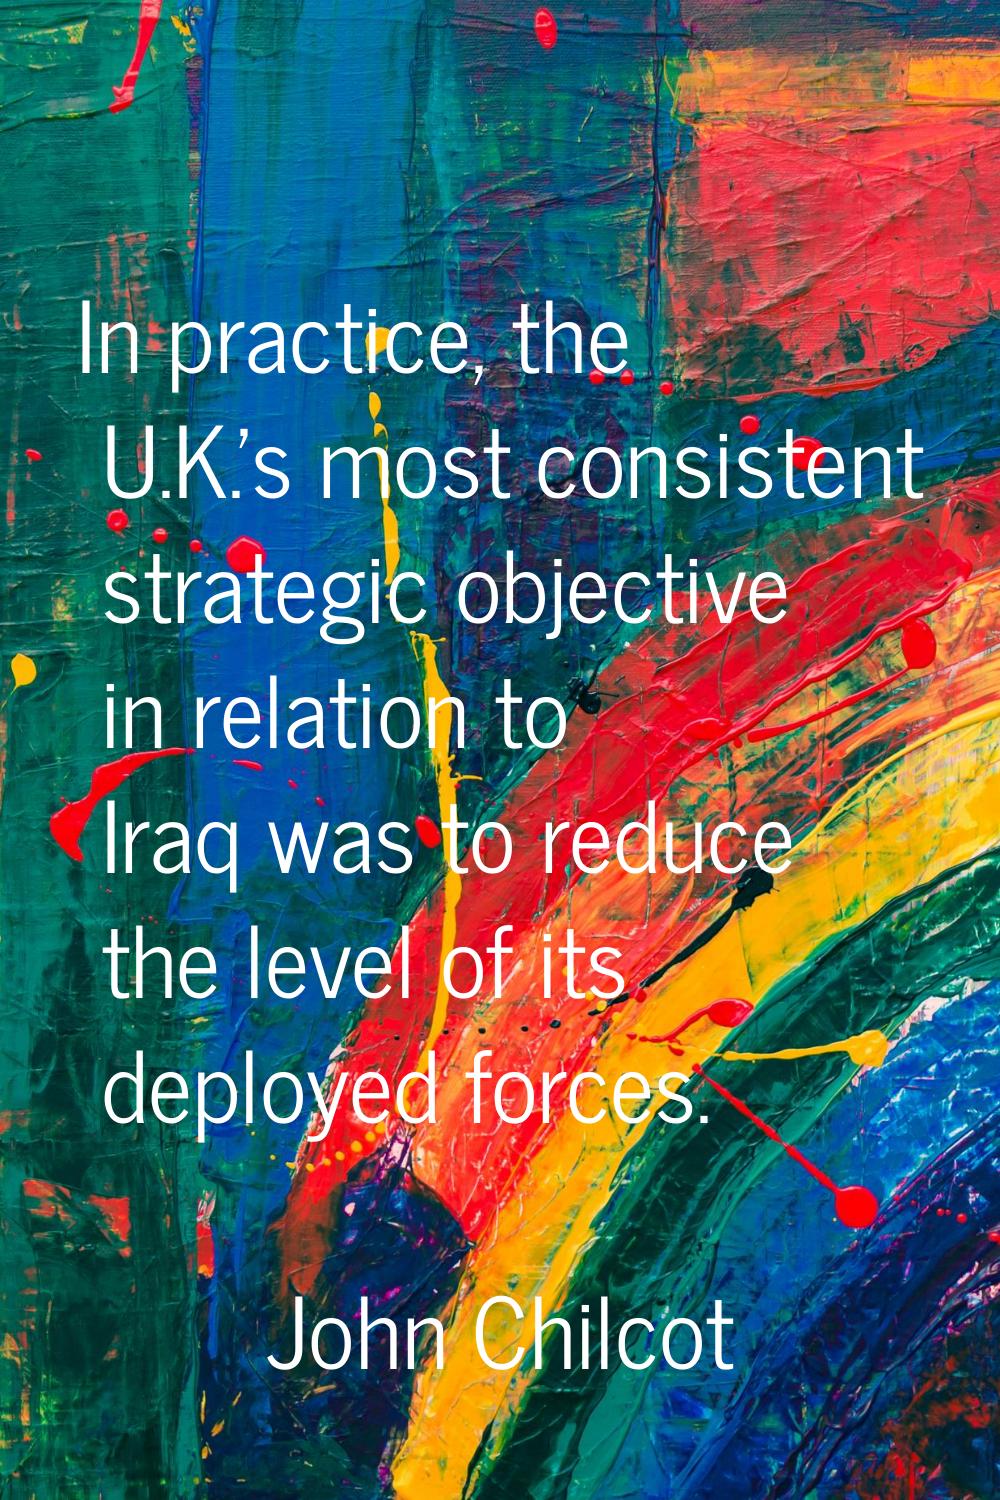 In practice, the U.K.'s most consistent strategic objective in relation to Iraq was to reduce the l